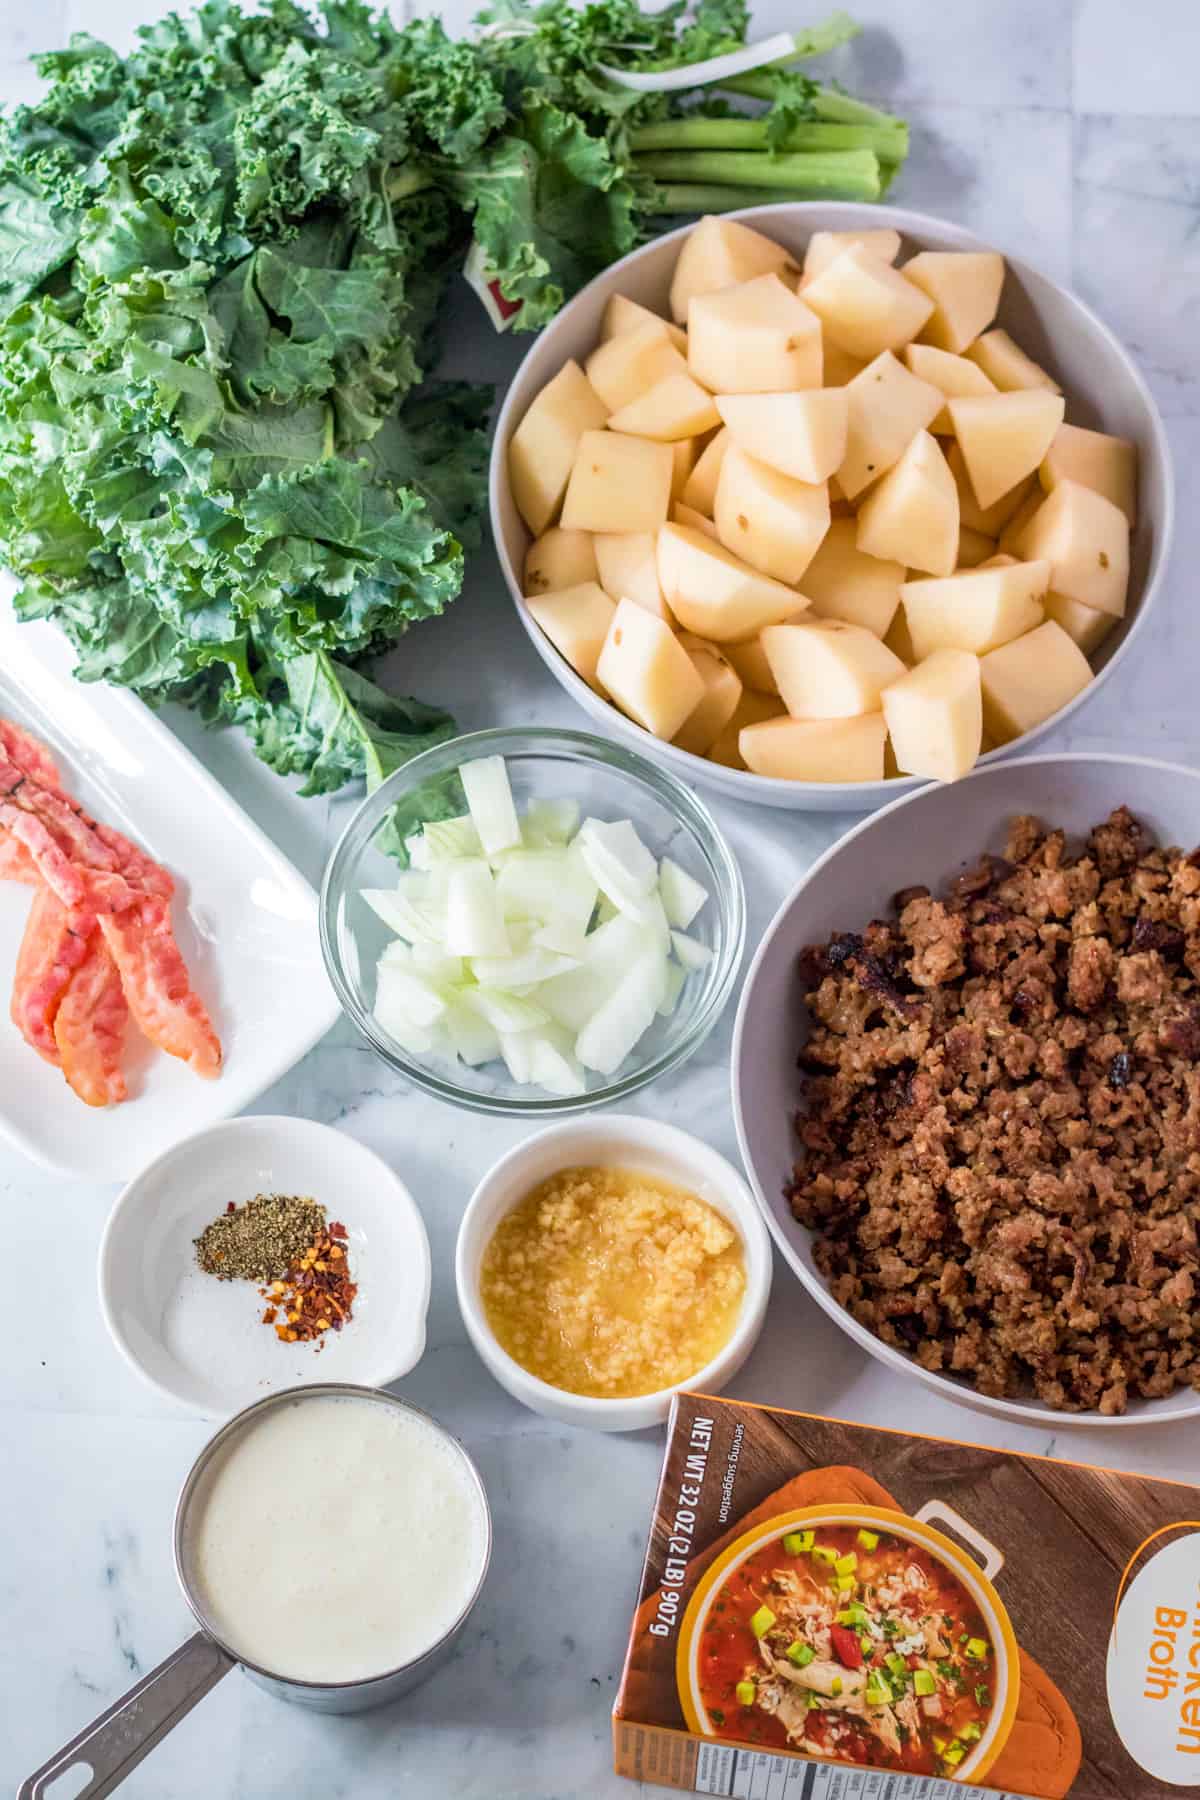 Ingredients needed to make Slow Cooker Zuppa Toscana.